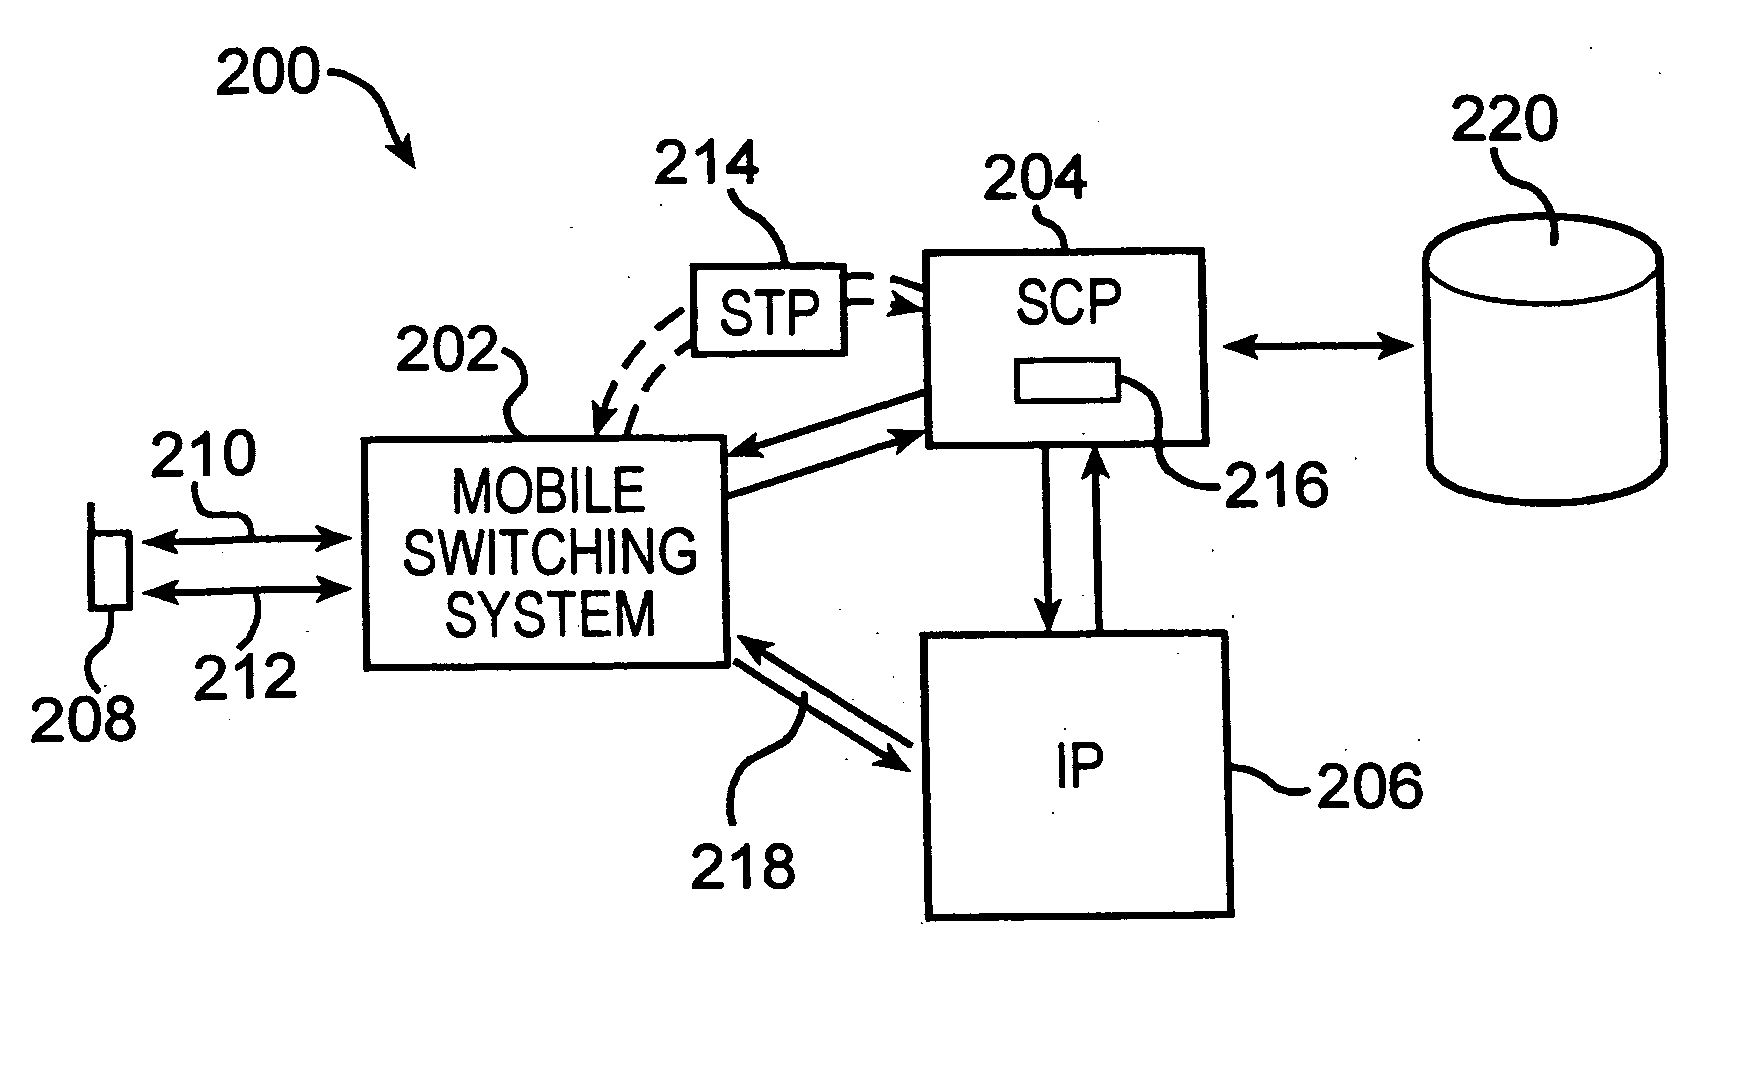 Pre-paid wireless interactive voice response system with variable announdements